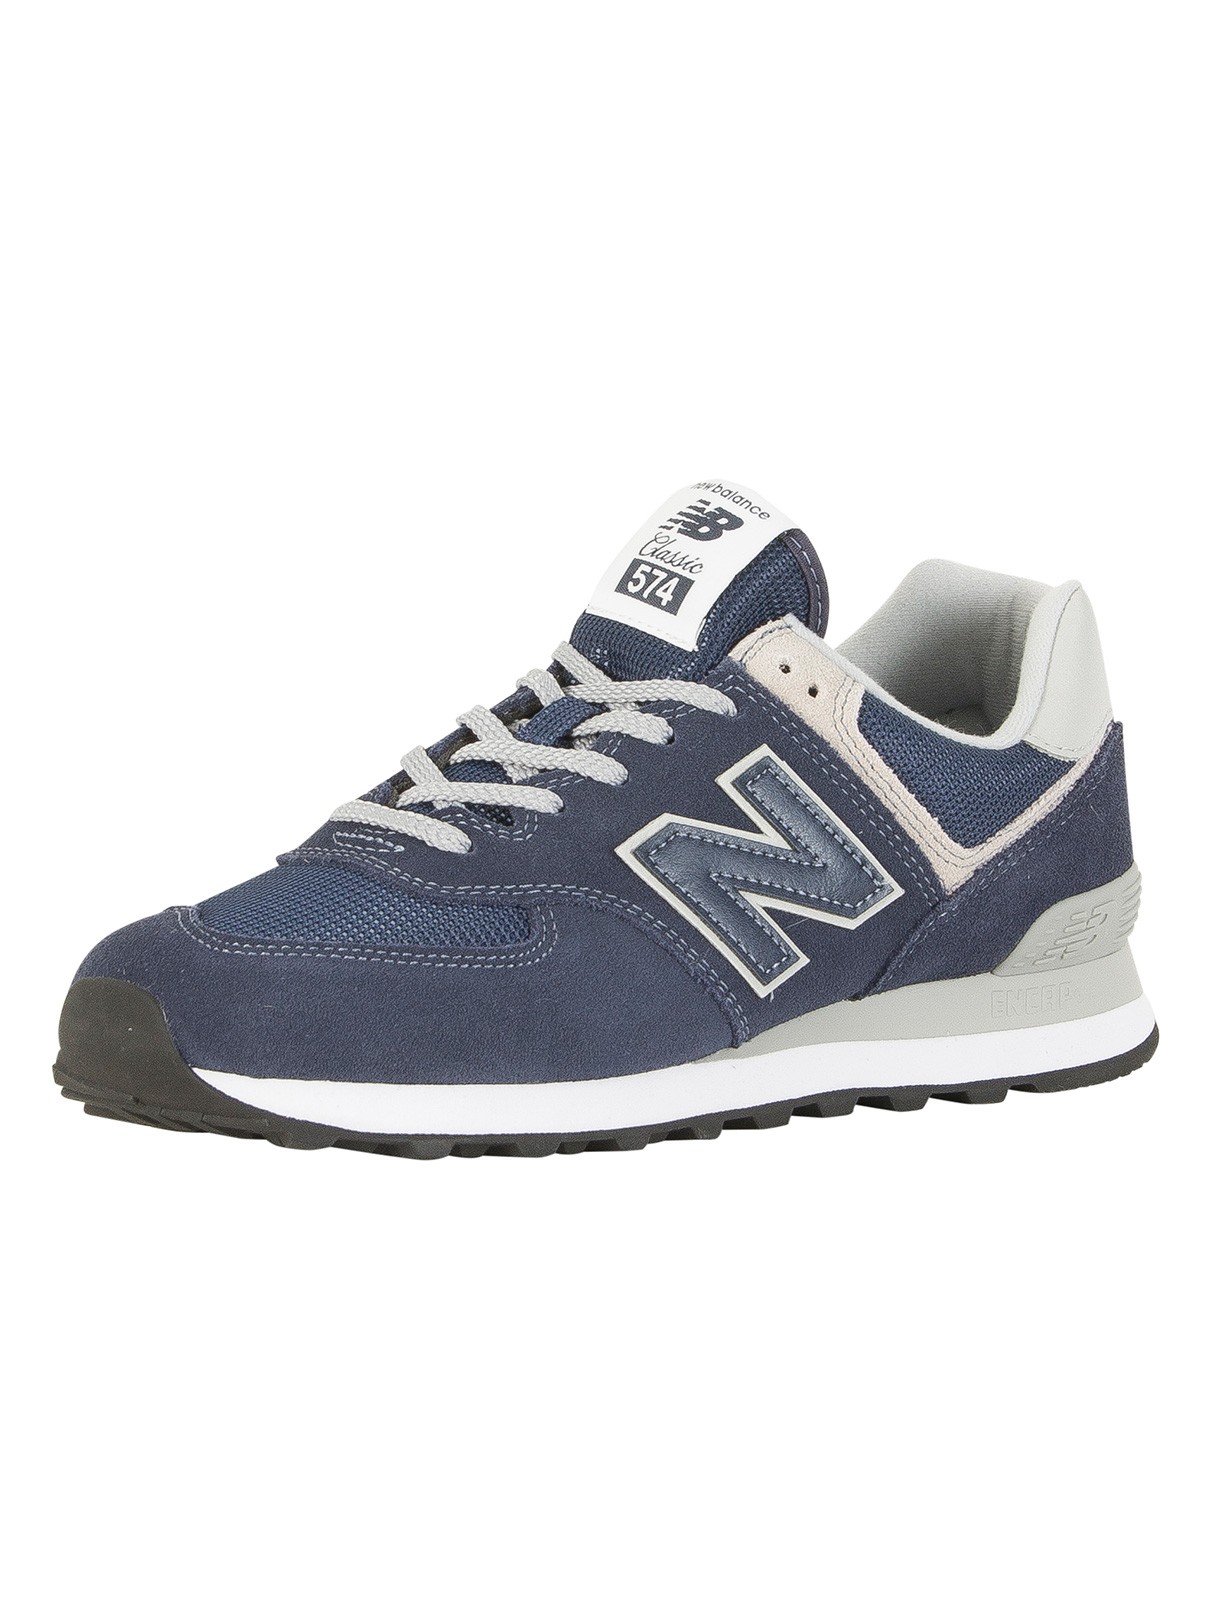 New Balance 574 Trainers - Navy | Standout